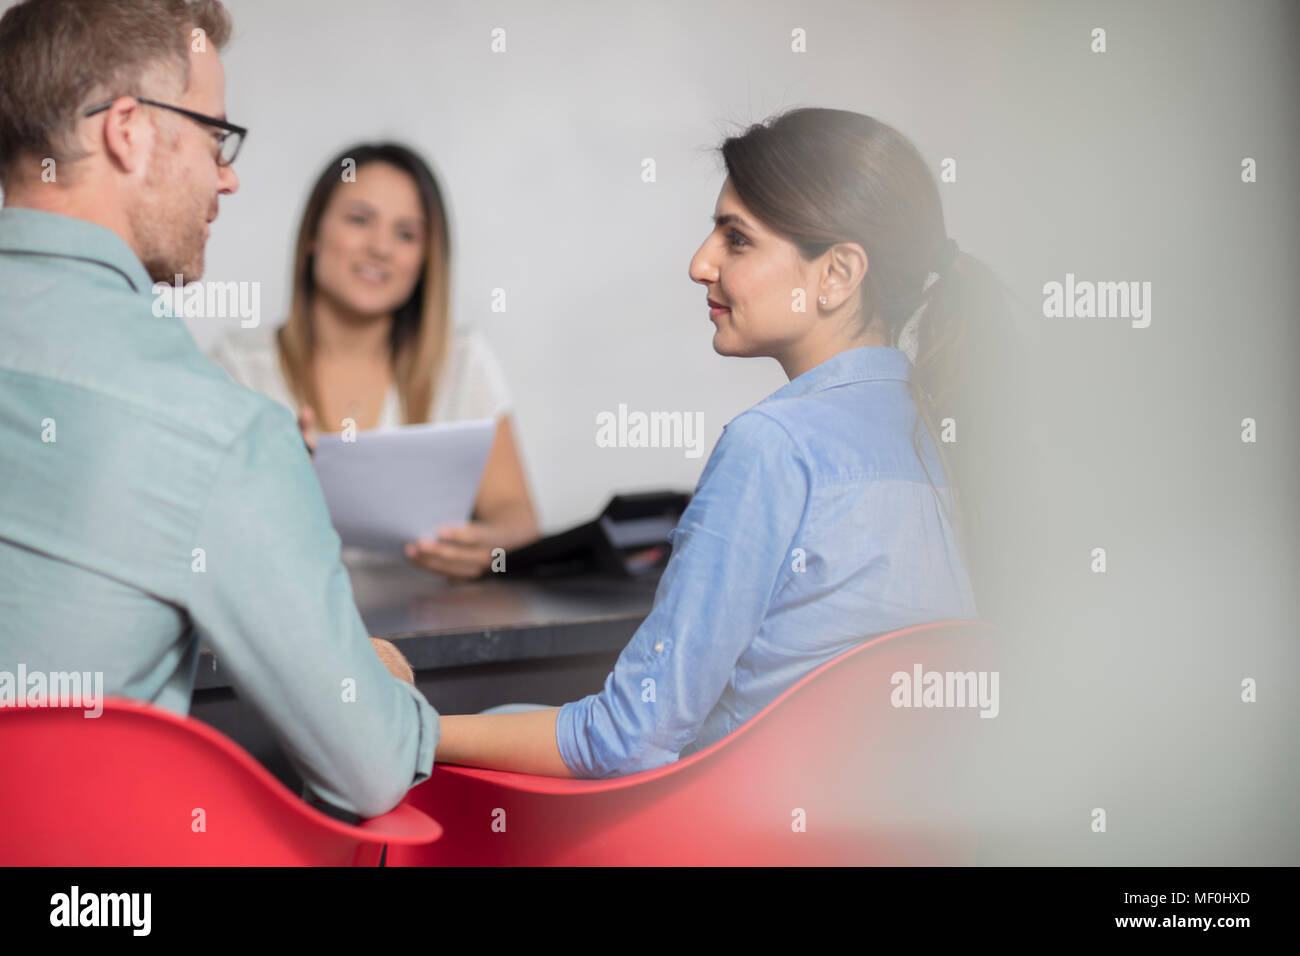 Couple sitting at desk opposite to woman Stock Photo